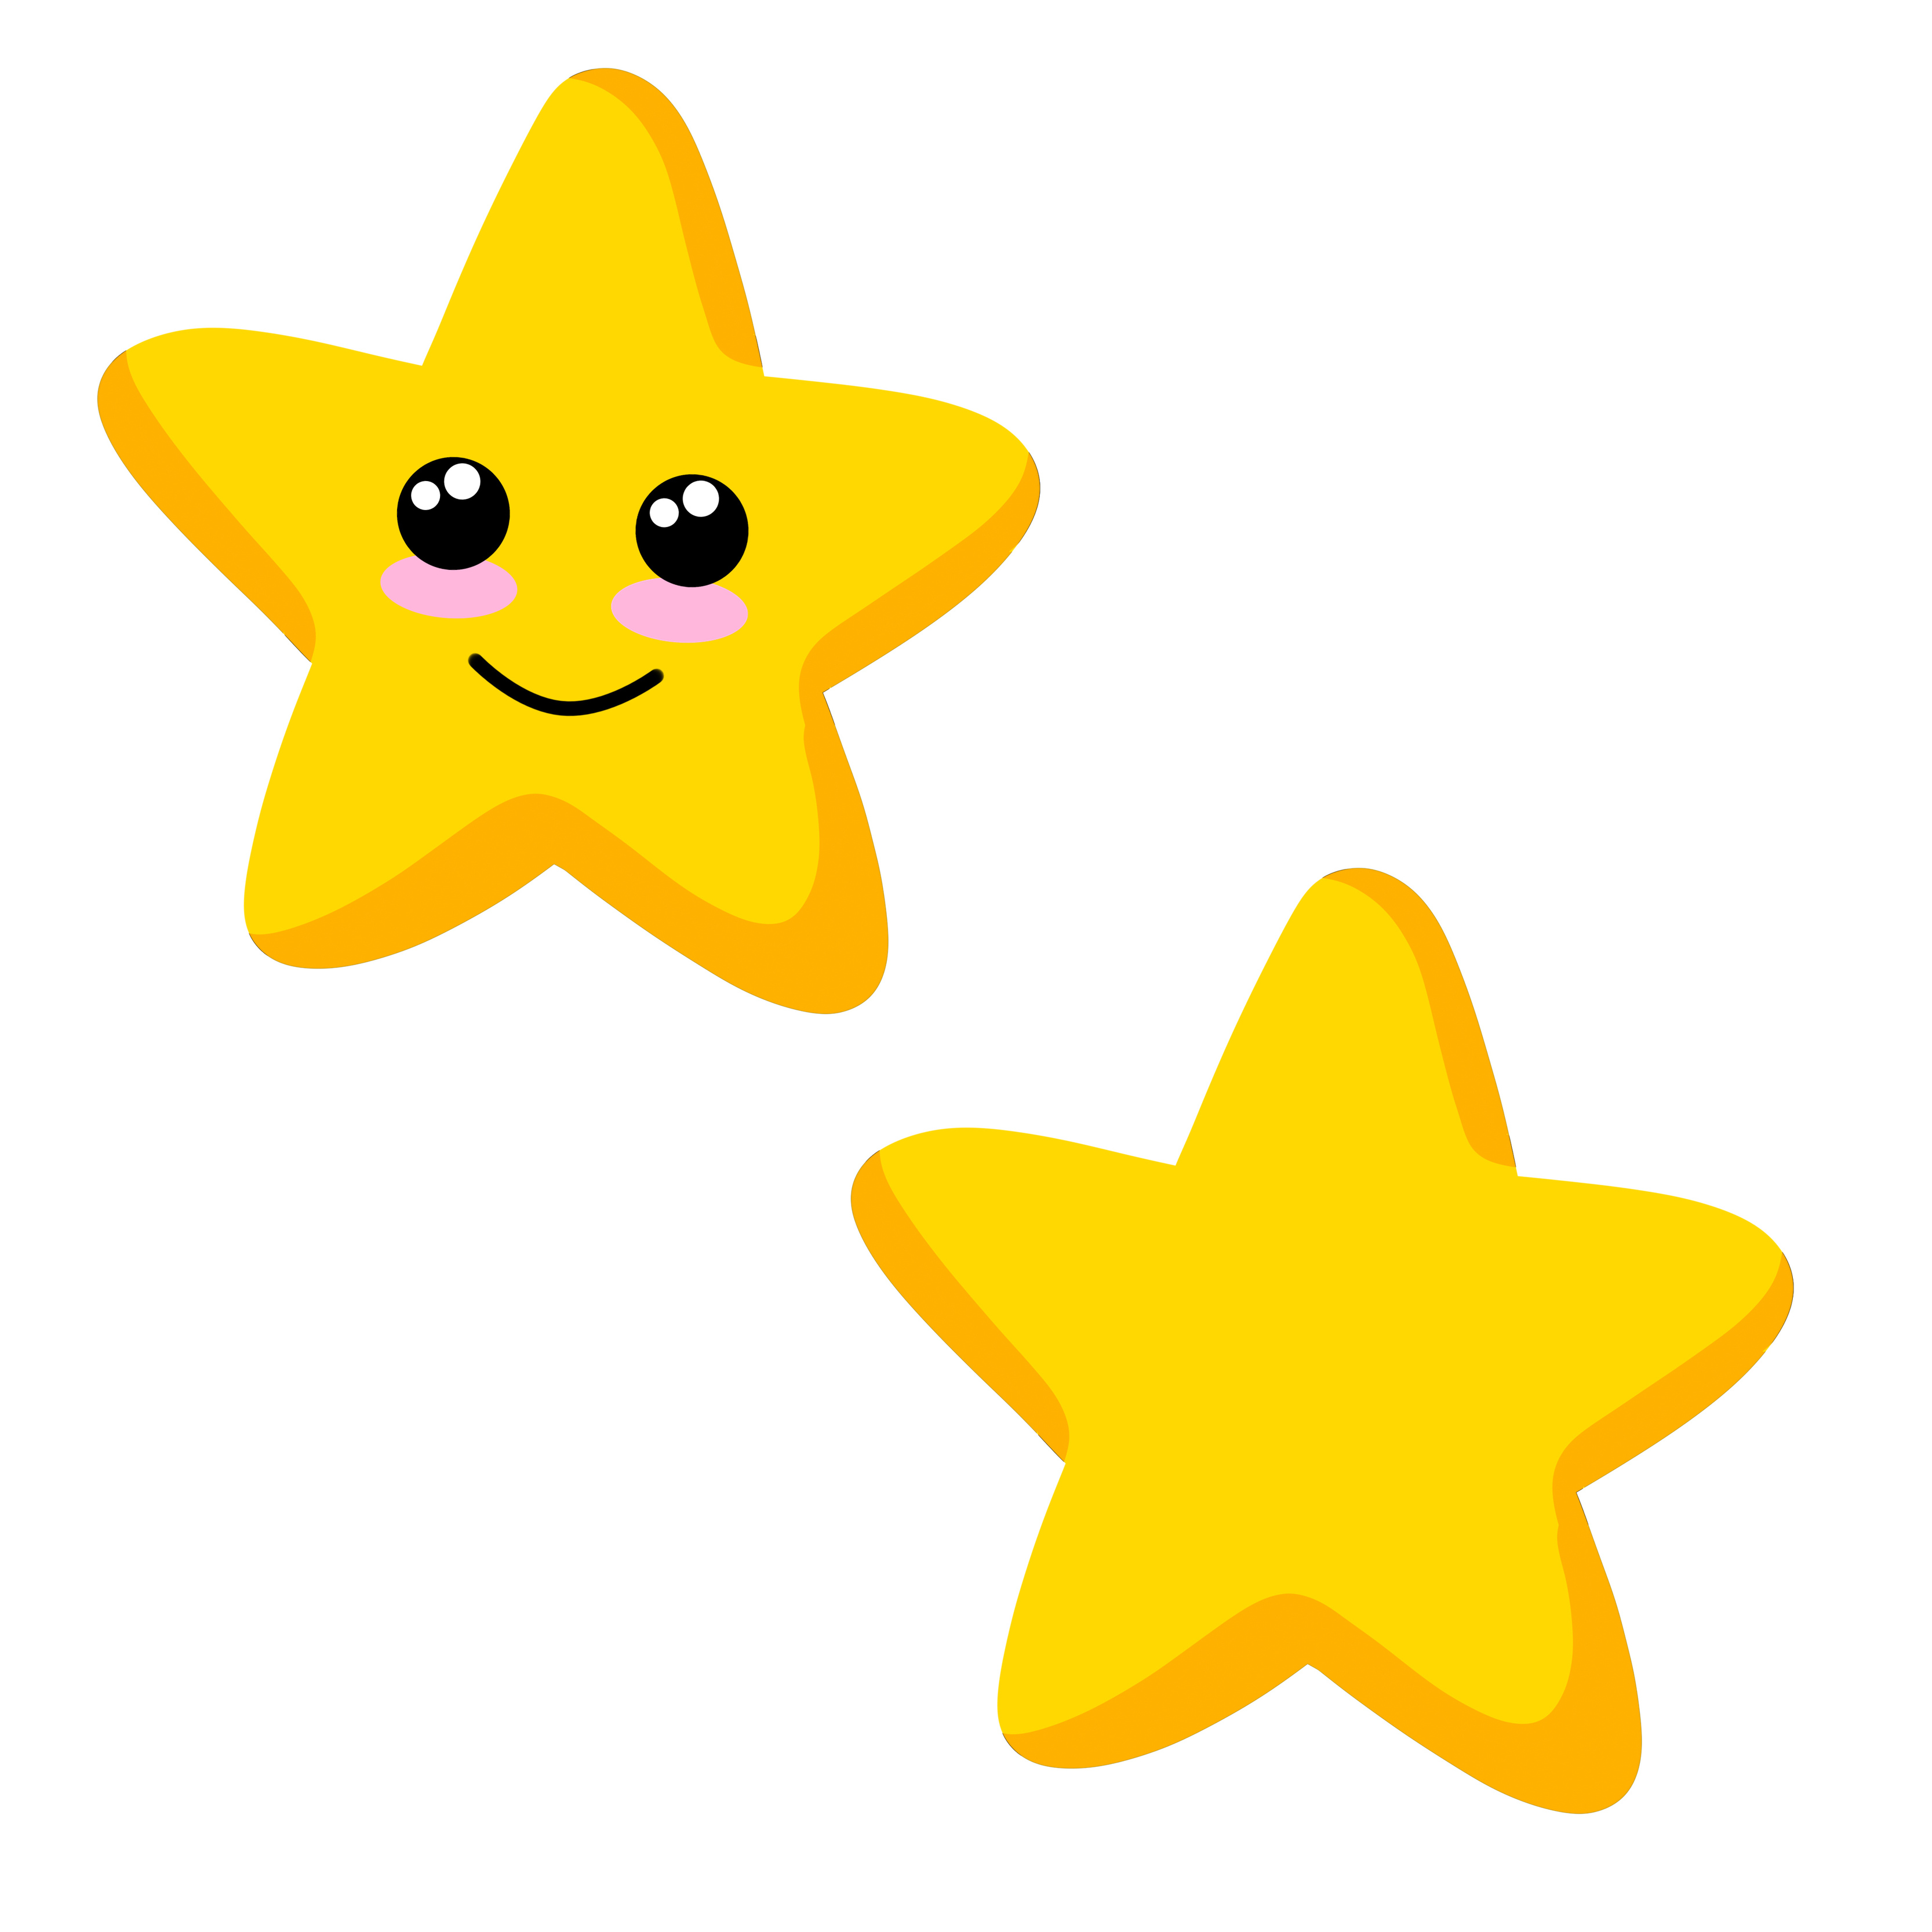 Cartoon Star Vector Art, Icons, and Graphics for Free Download